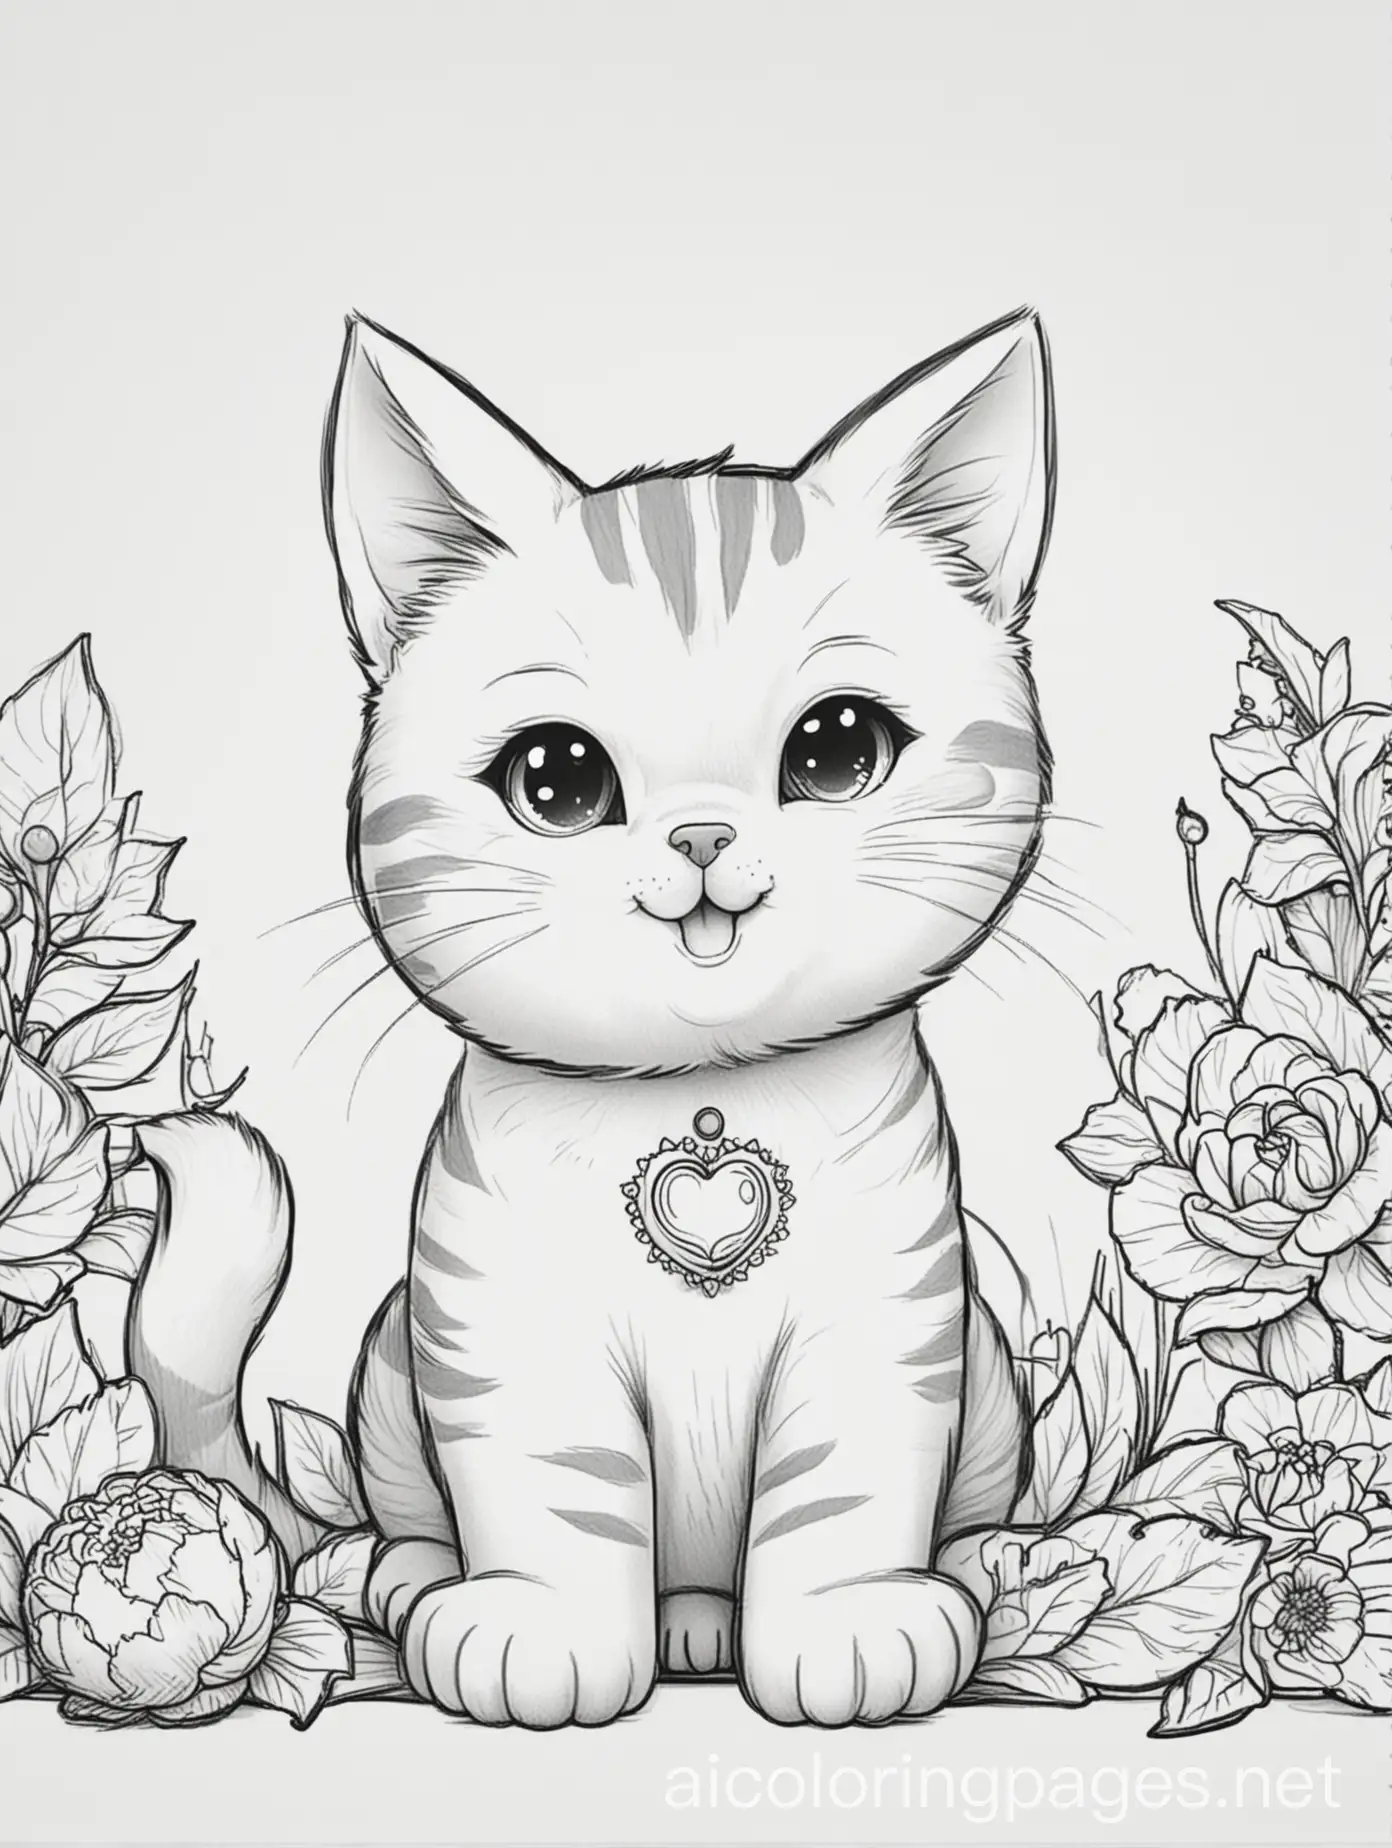 cute cat smiling and winking, toys around, Coloring Page, black and white, line art, white background, Simplicity, Ample White Space. , Coloring Page, black and white, line art, white background, Simplicity, Ample White Space. The background of the coloring page is plain white to make it easy for young children to color within the lines. The outlines of all the subjects are easy to distinguish, making it simple for kids to color without too much difficulty